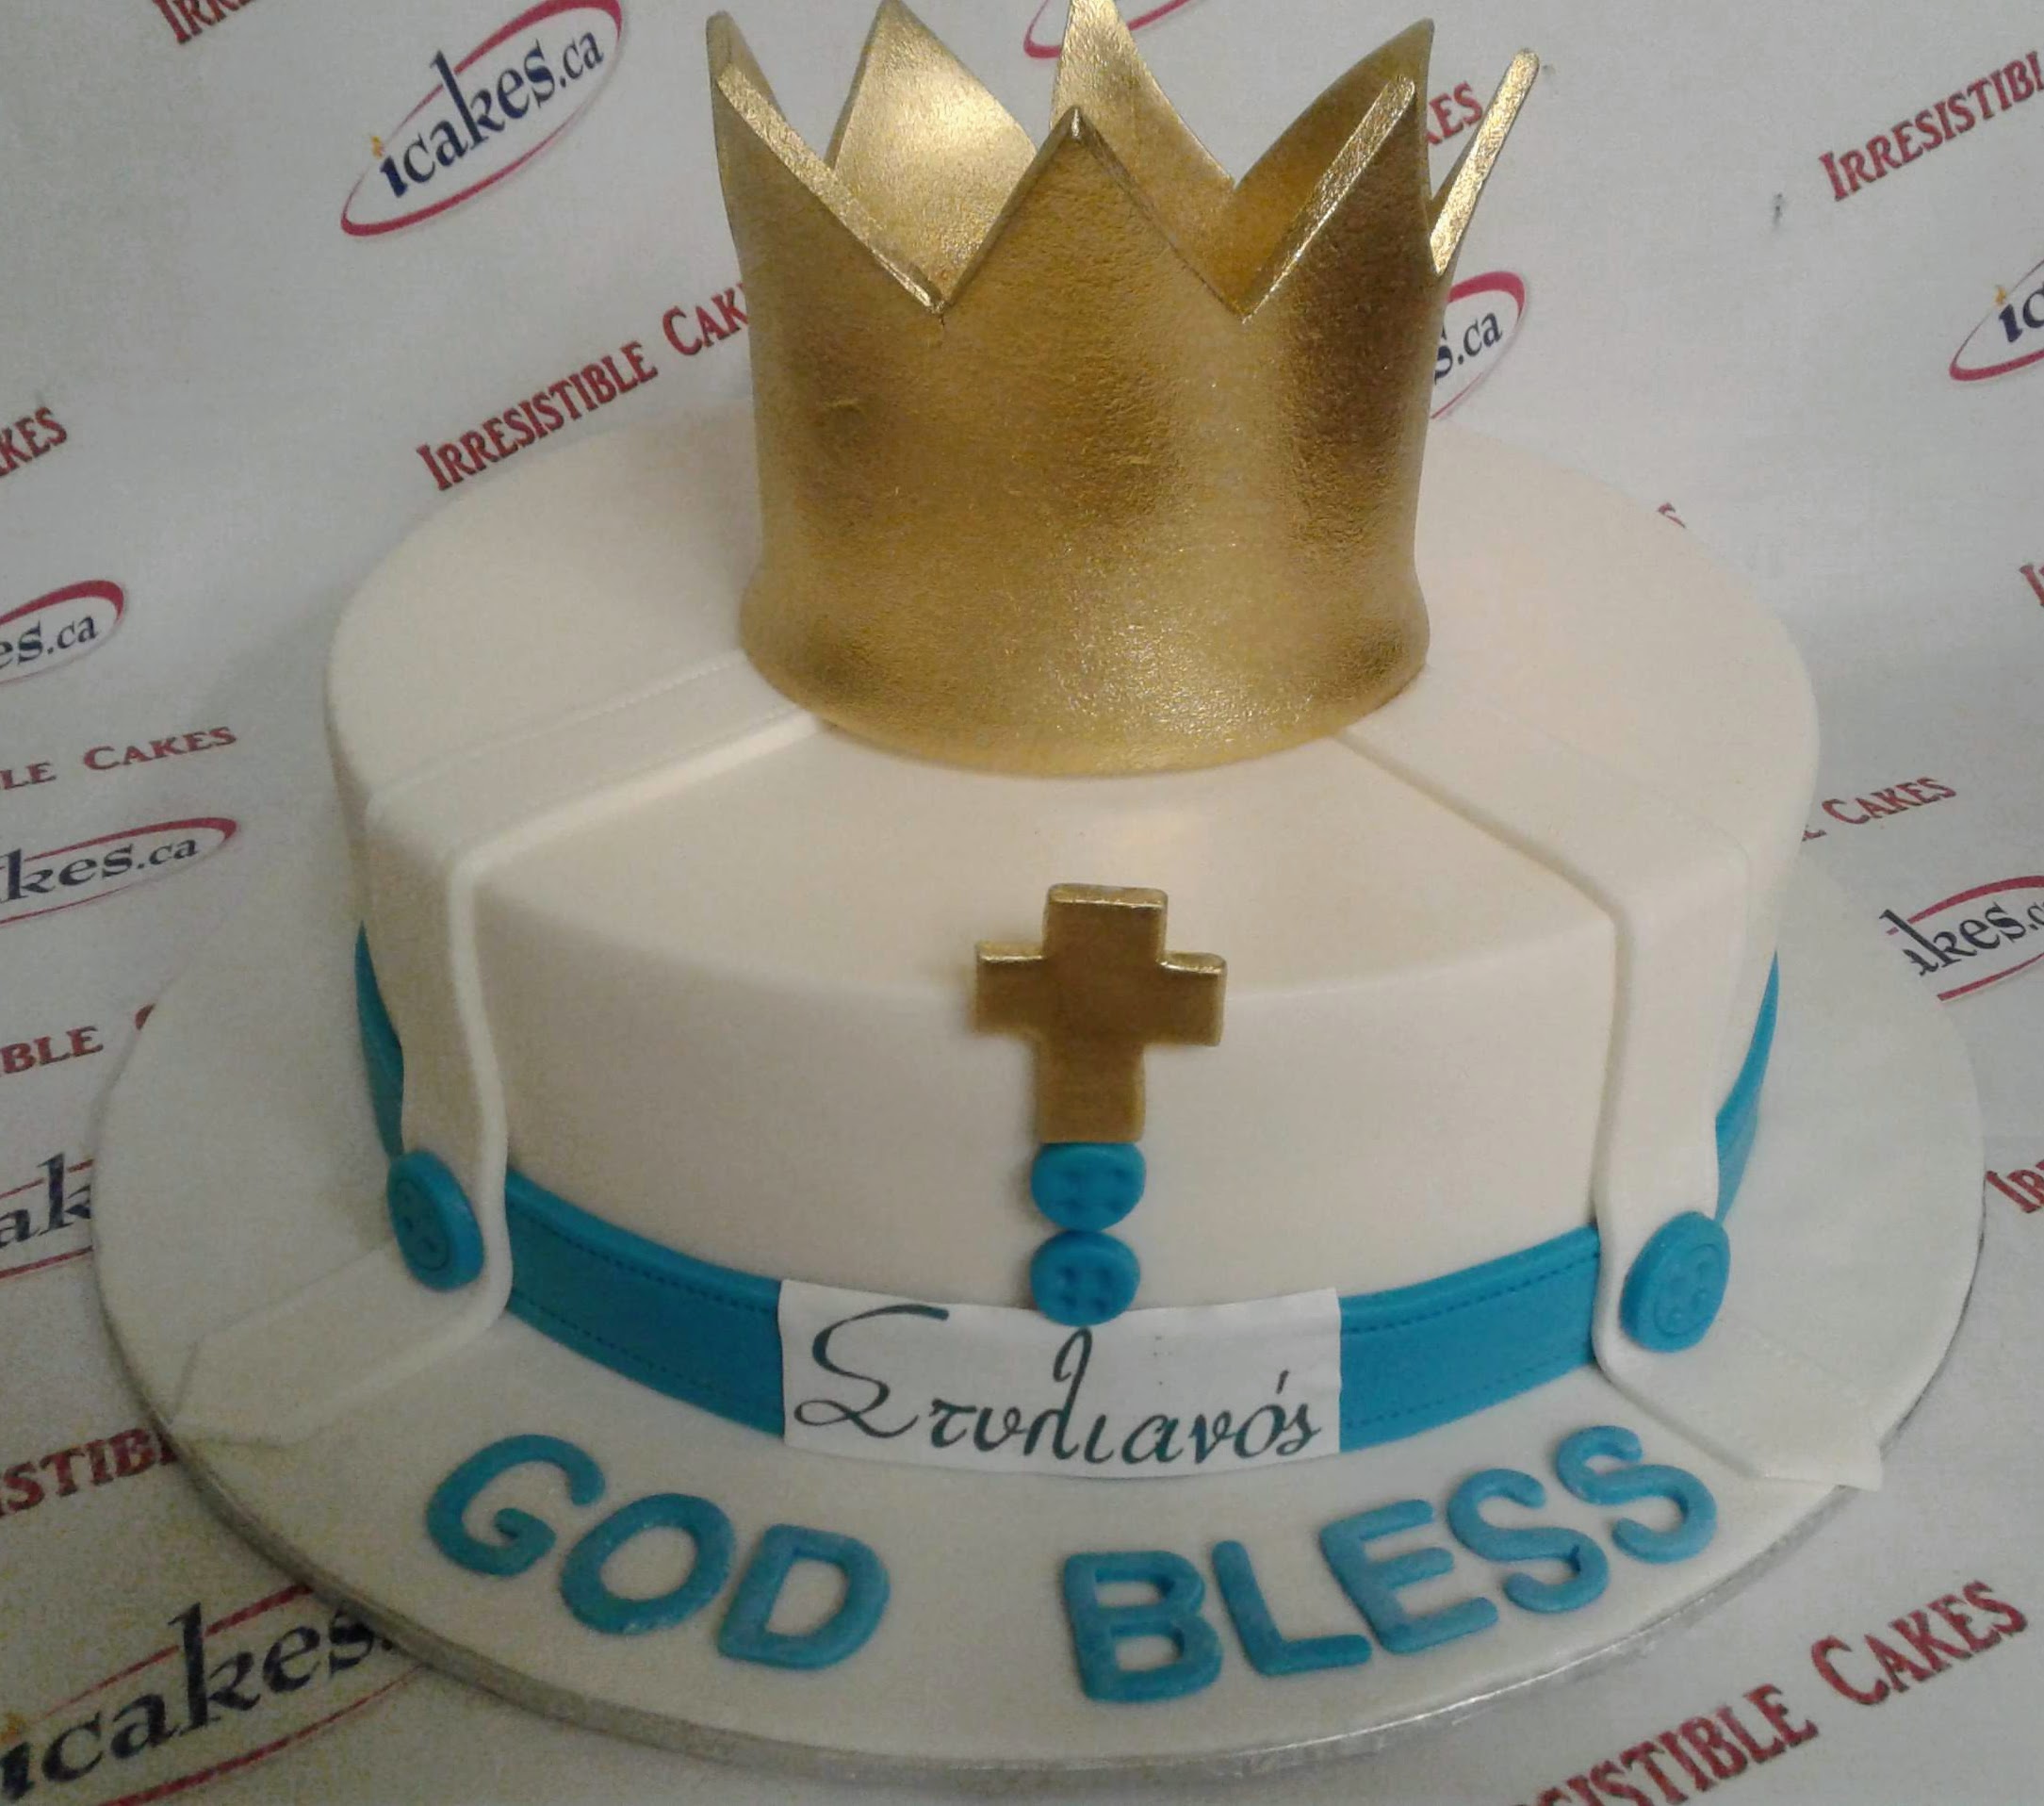 Christening, first communion, baptism cakes & cookies in Northern NJ